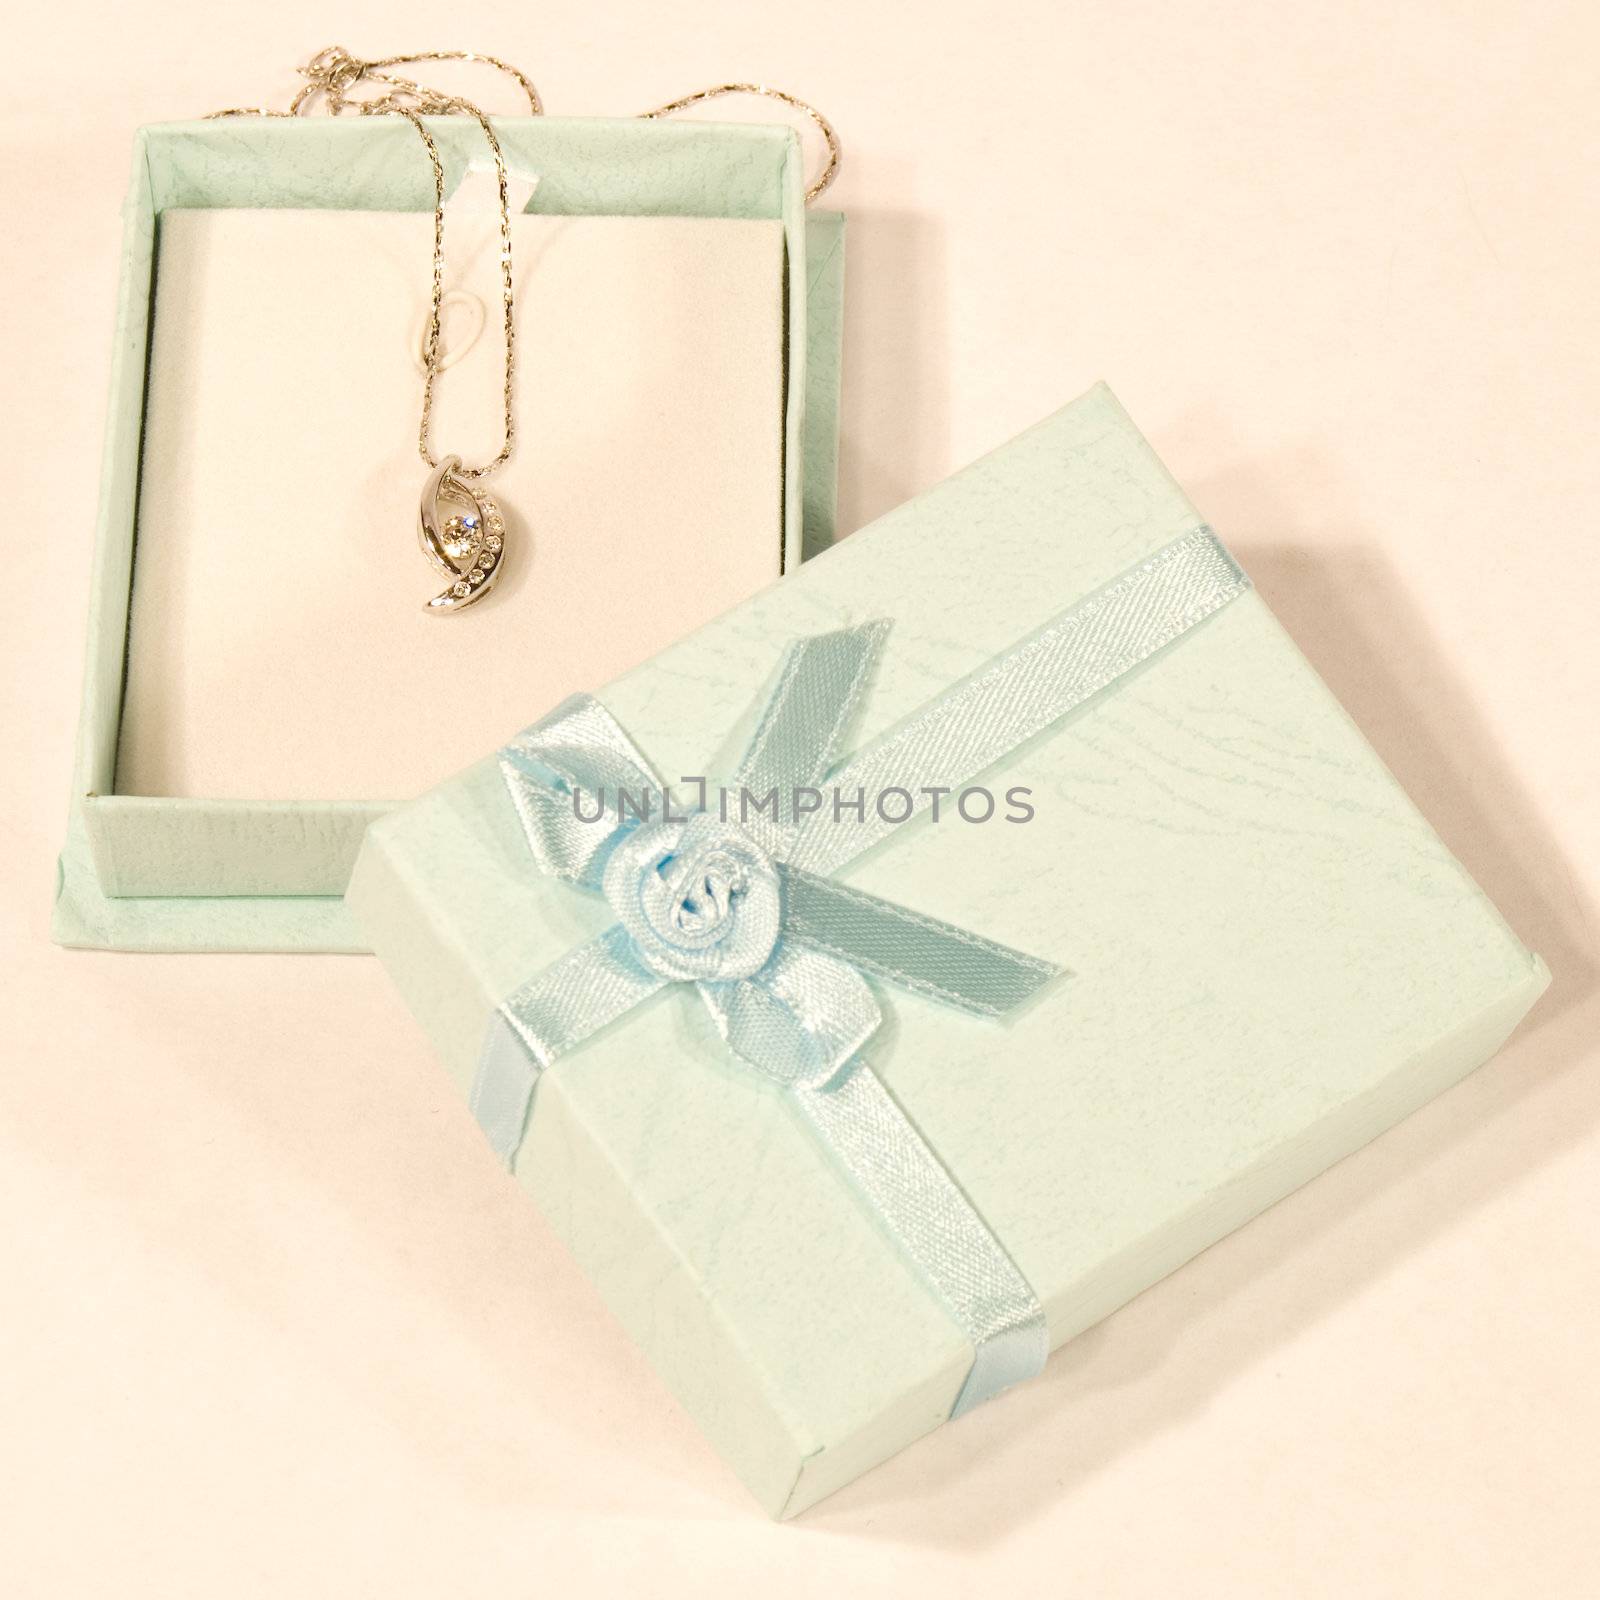 Diamond Necklace In Small Gift Box by dragon_fang